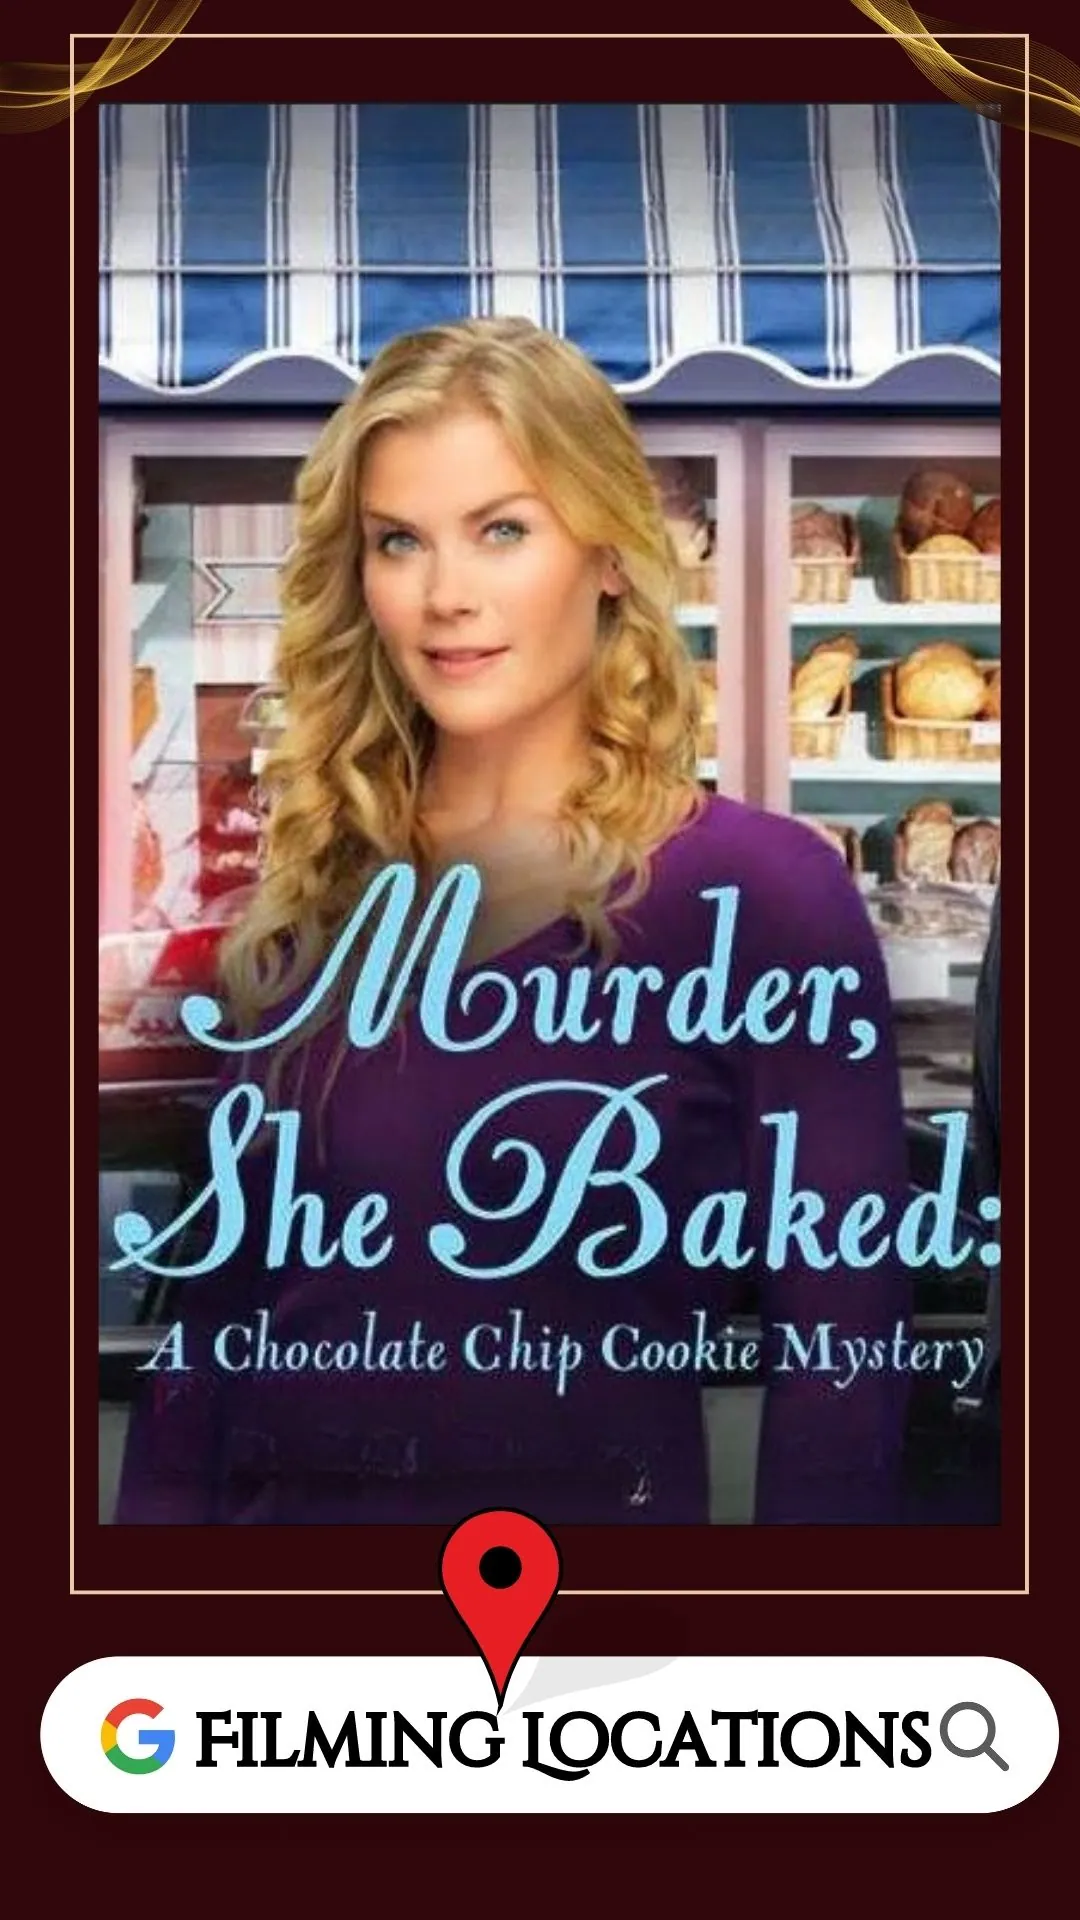 Murder She Baked Filming Locations (2015)